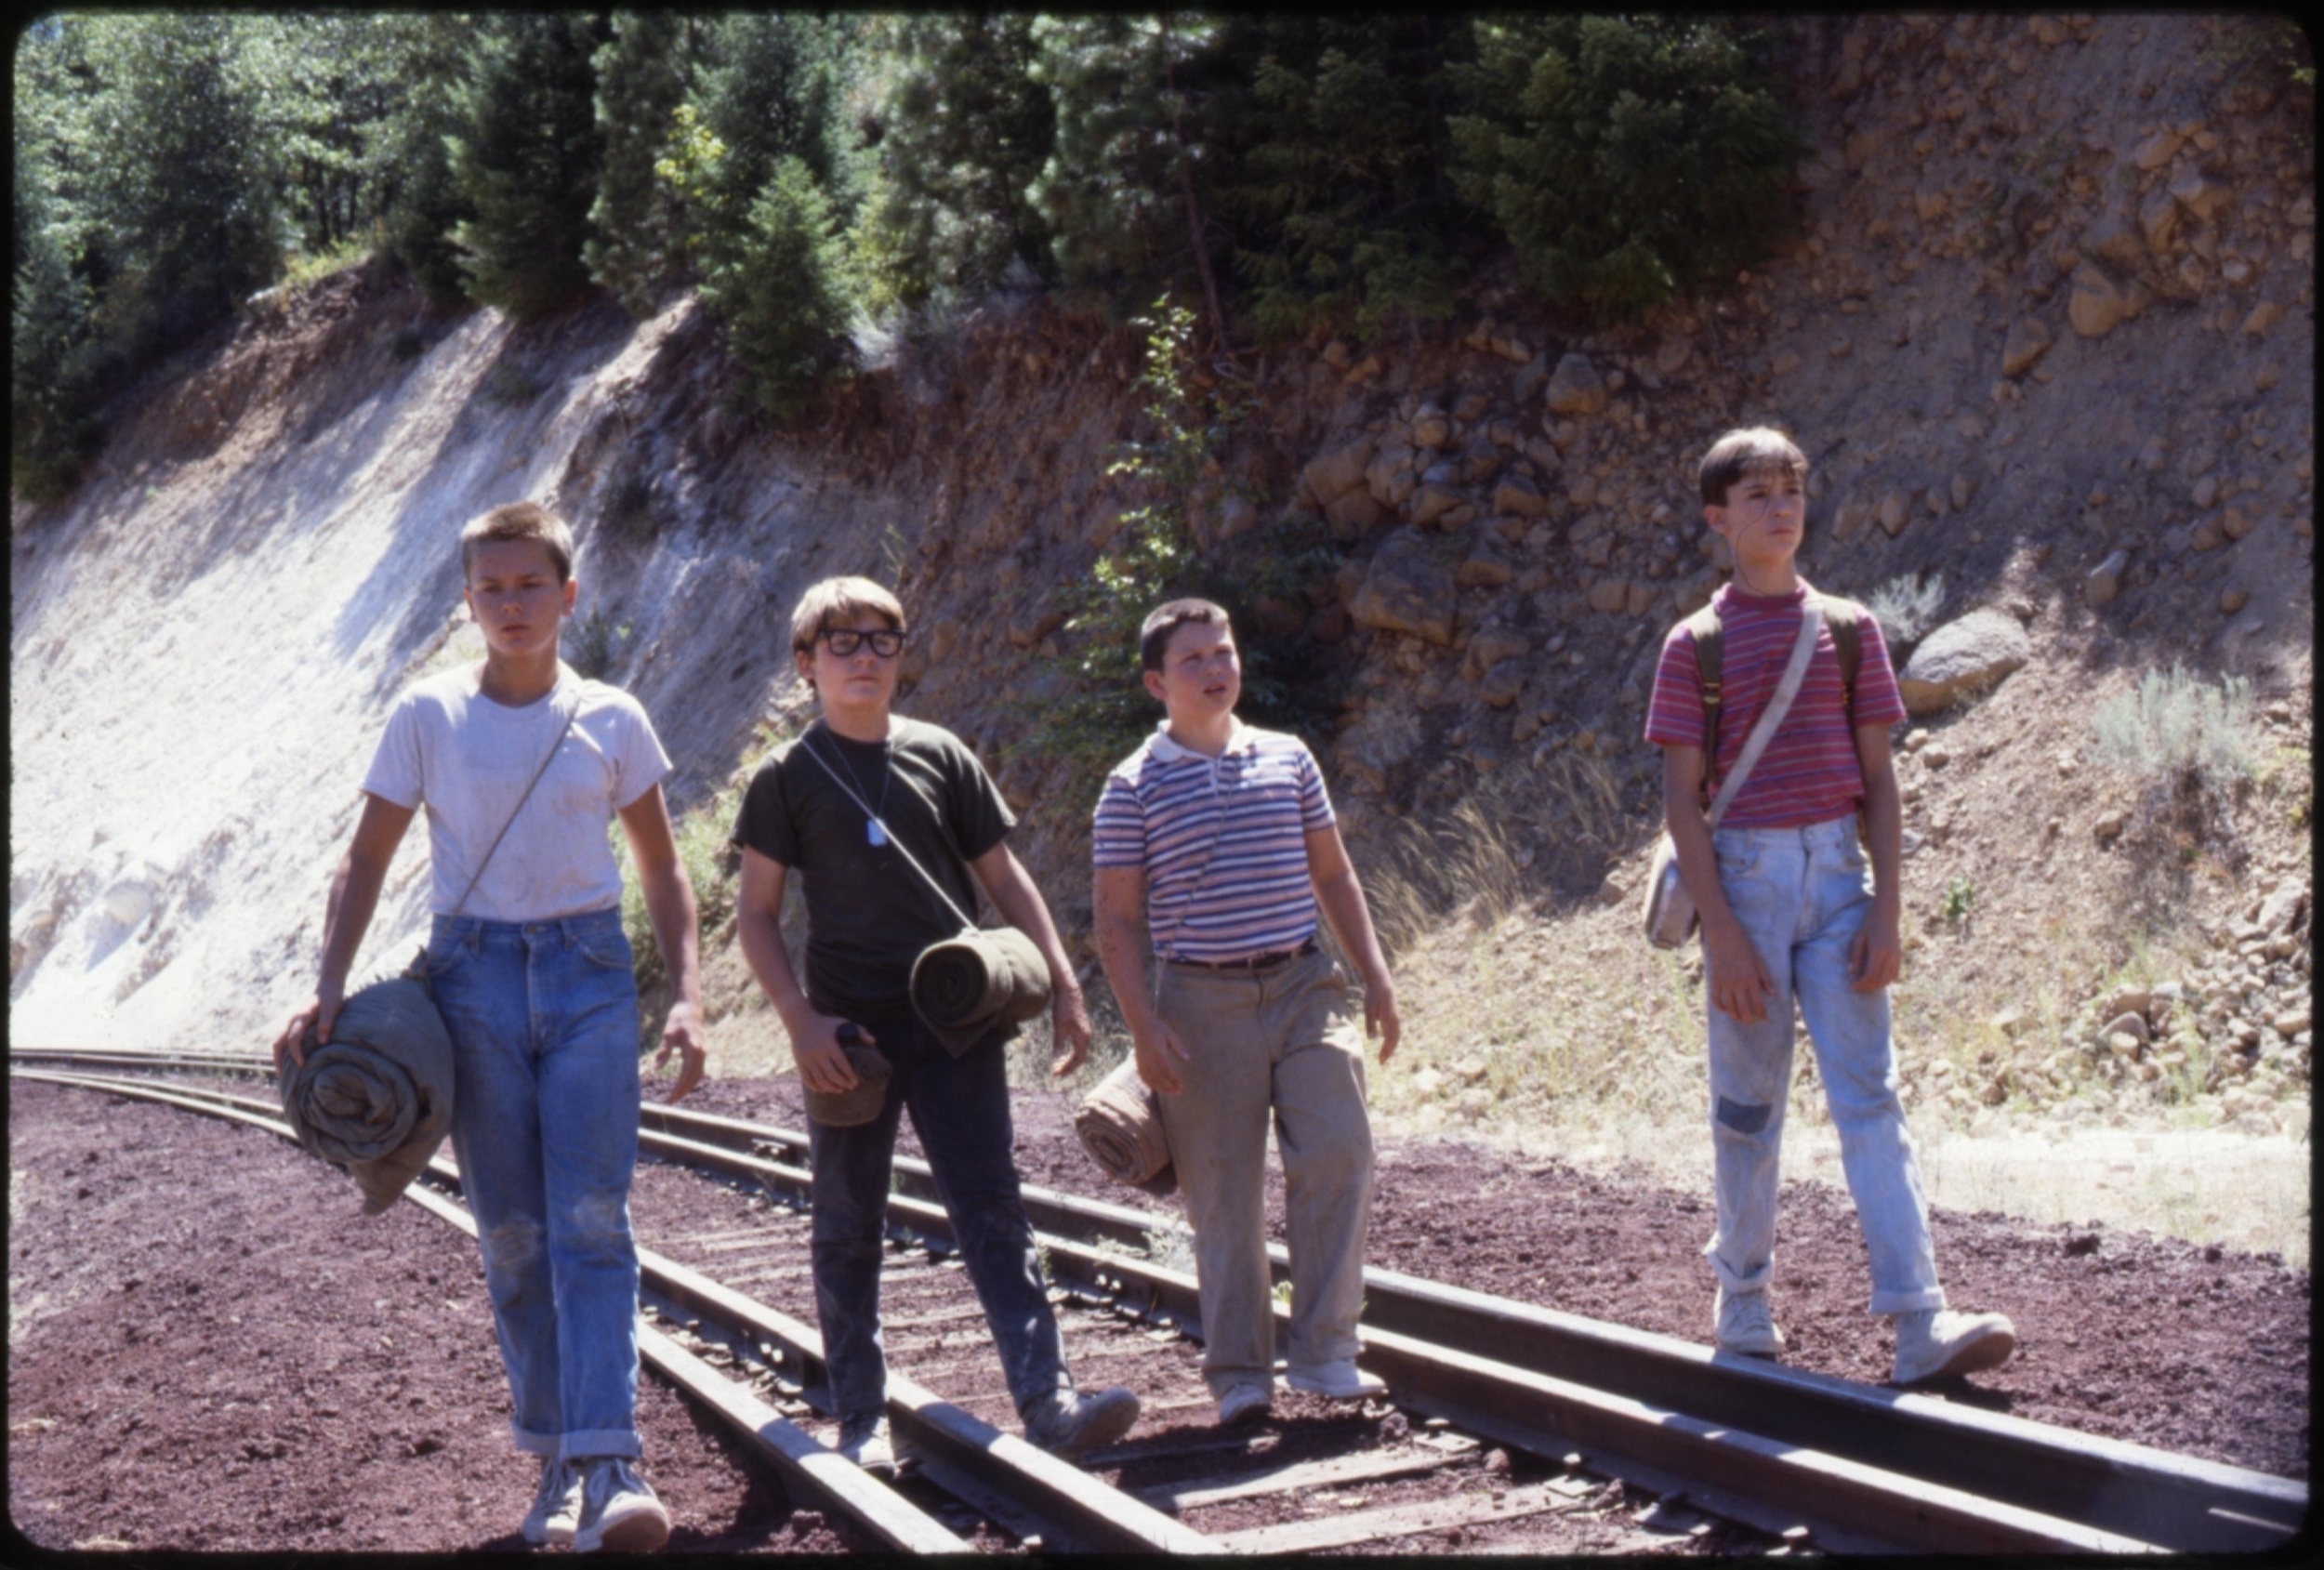 <p>Another timeless classic based on a Stephen King novella (<em>The Body</em>). Played by Wil Wheaton, River Phoenix, Jerry O'Connell, and Corey Feldman, four middle-schoolers' quest during the late summer of 1959 is filled with companionship, <a href="https://www.youtube.com/watch?v=gozRrRCtj6E&t=4s">adventure</a>, humor, and emotion.</p><p>You may also like: <a href='https://www.yardbarker.com/entertainment/articles/affair_deal_20_essential_songs_about_cheating/s1__38412026'>Affair deal: 20 essential songs about cheating</a></p>